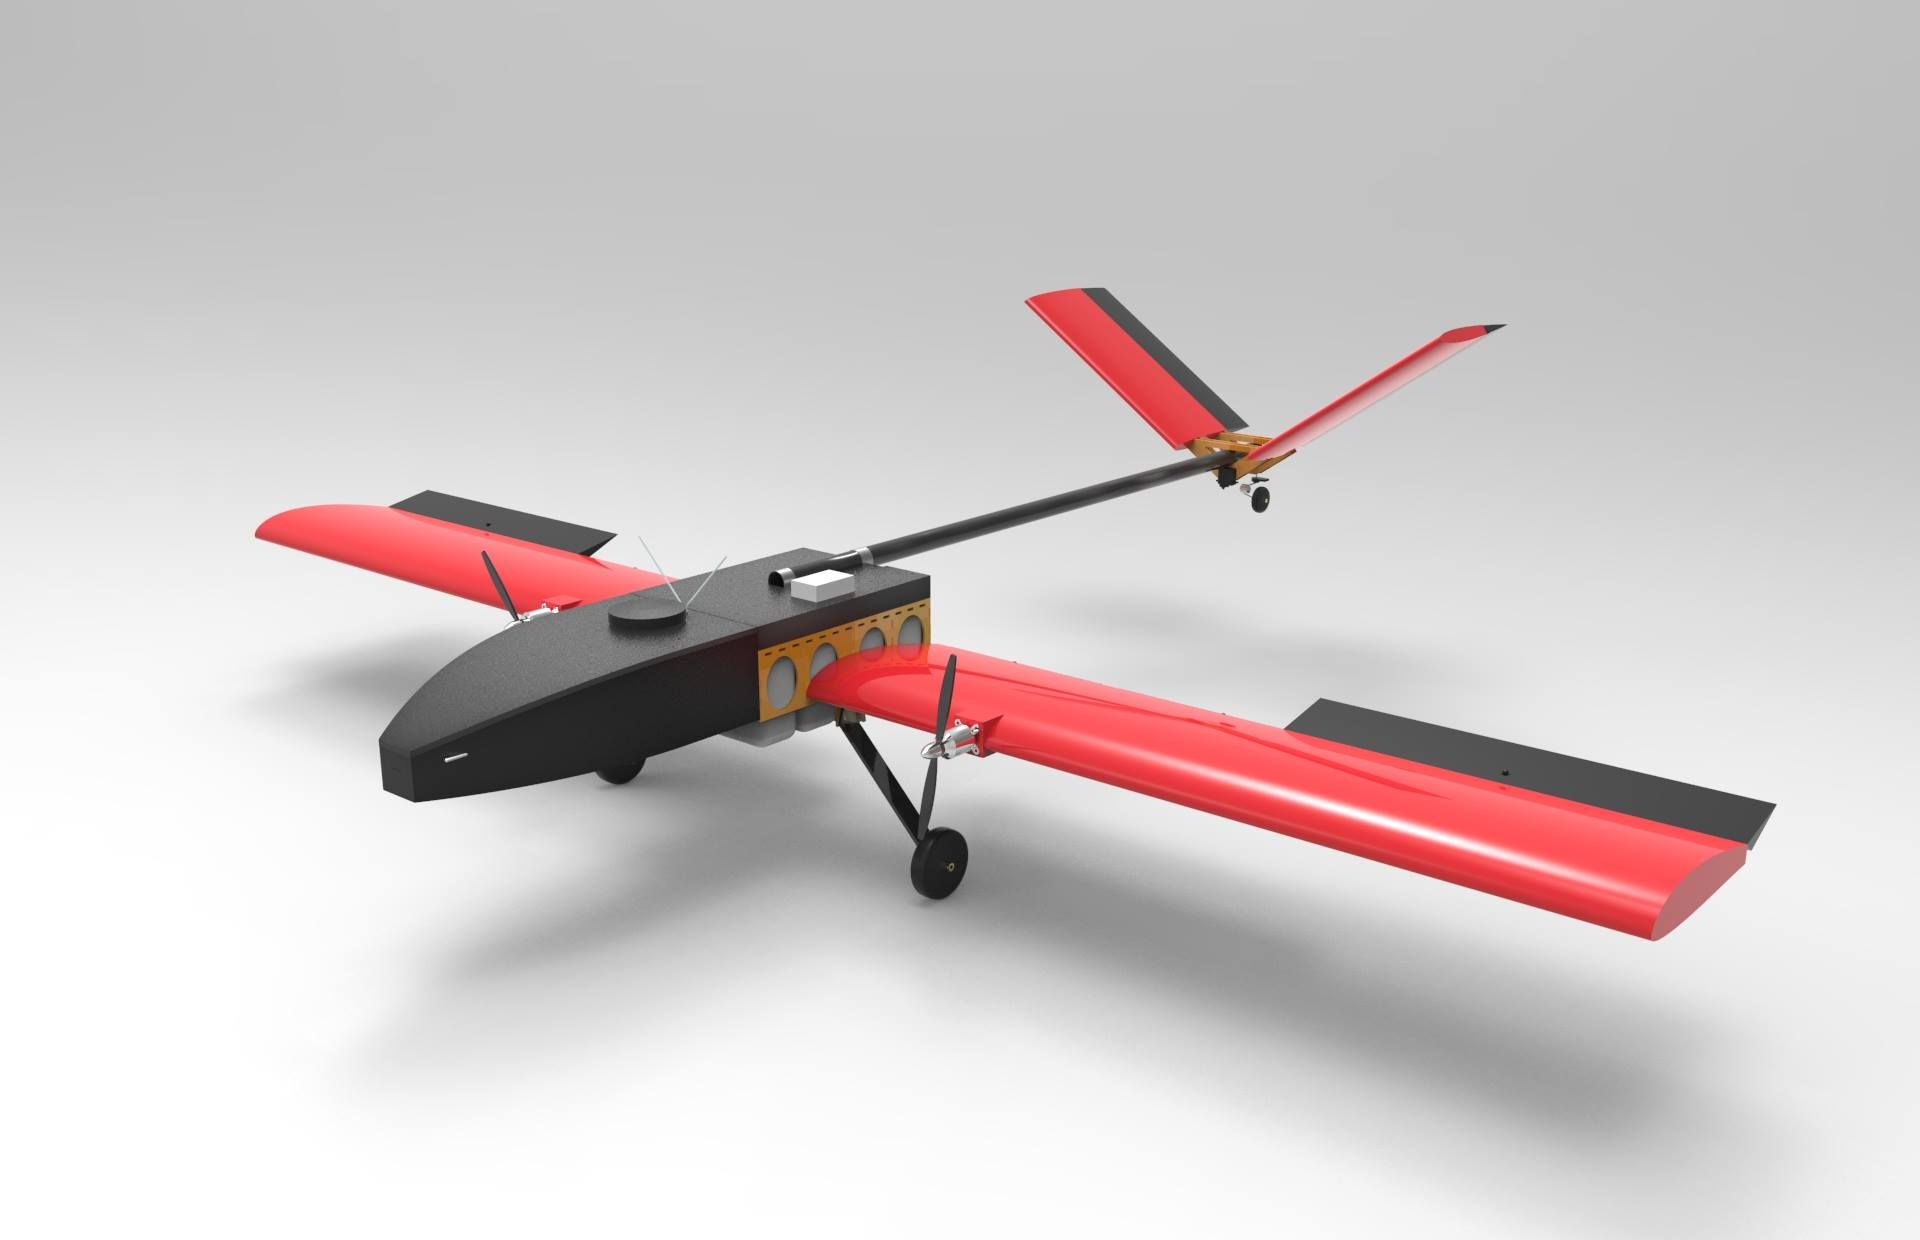 Team Newton's design for their UAS in the competition